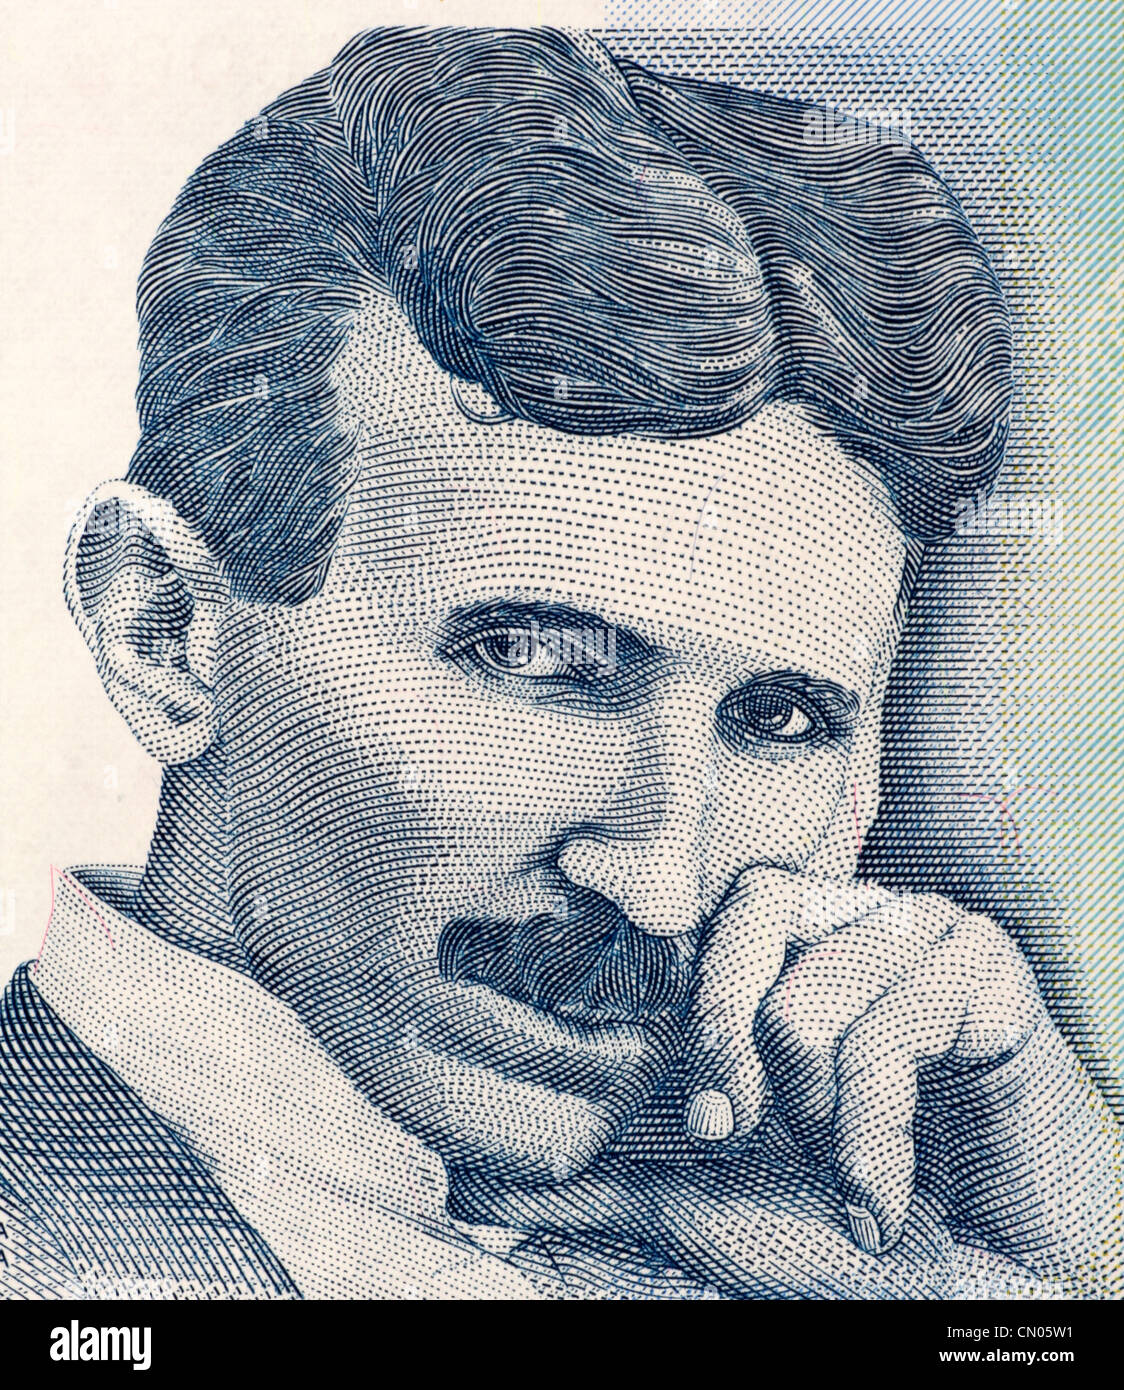 Nikola Tesla on 100 Dinara 2006 Banknote from Serbia. Best known as the Father of Physics. Stock Photo